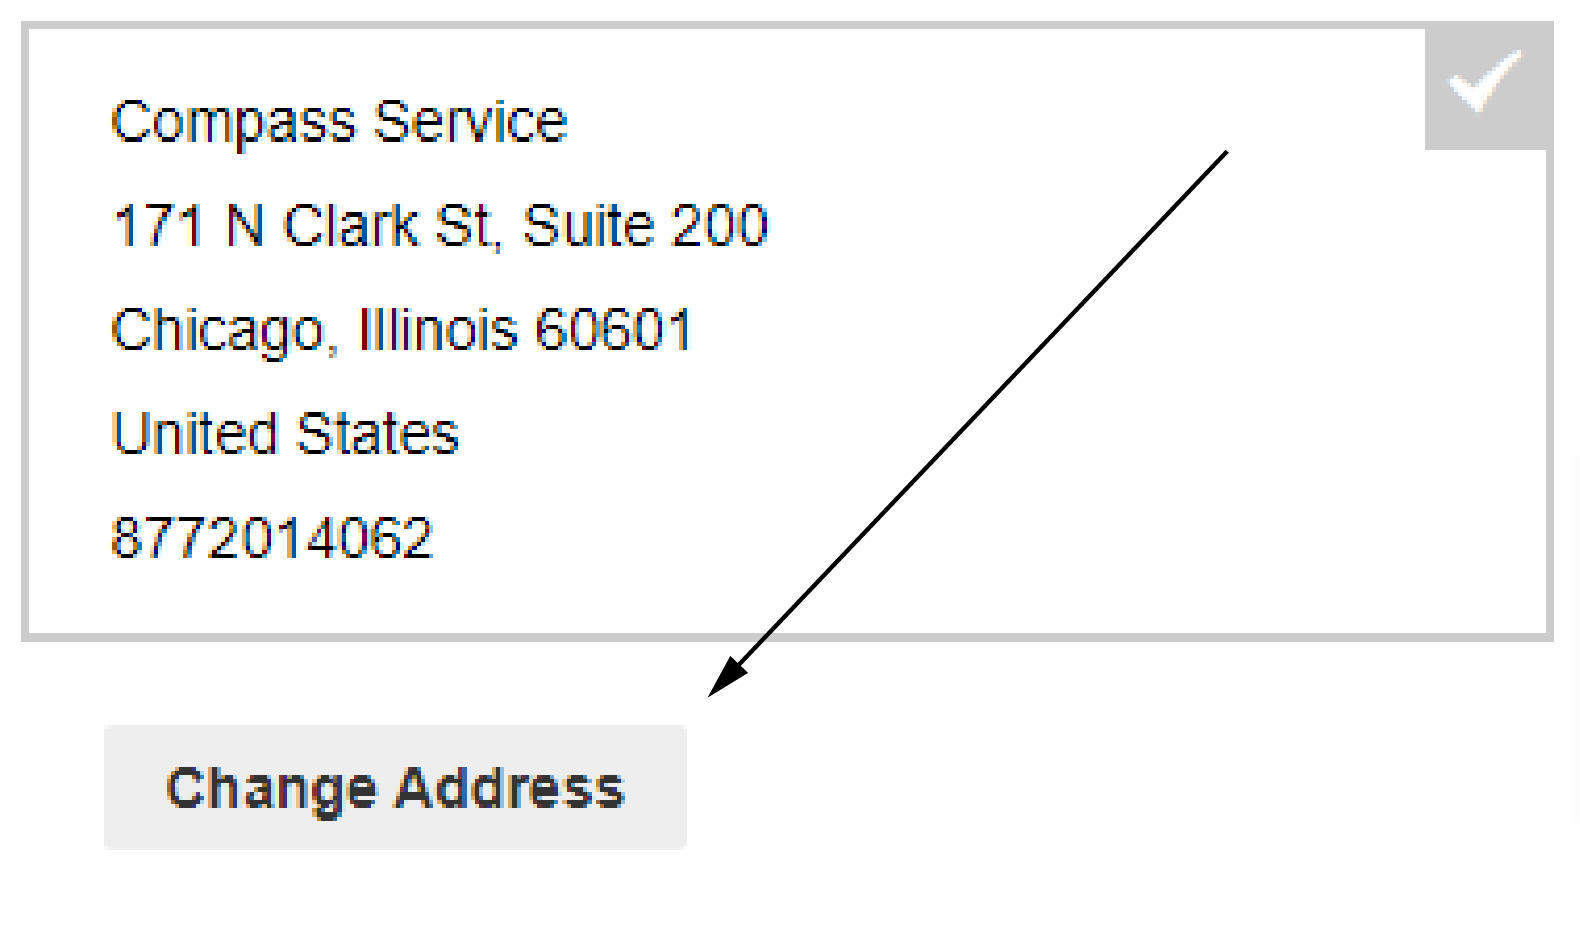 Image showing Change Address Button